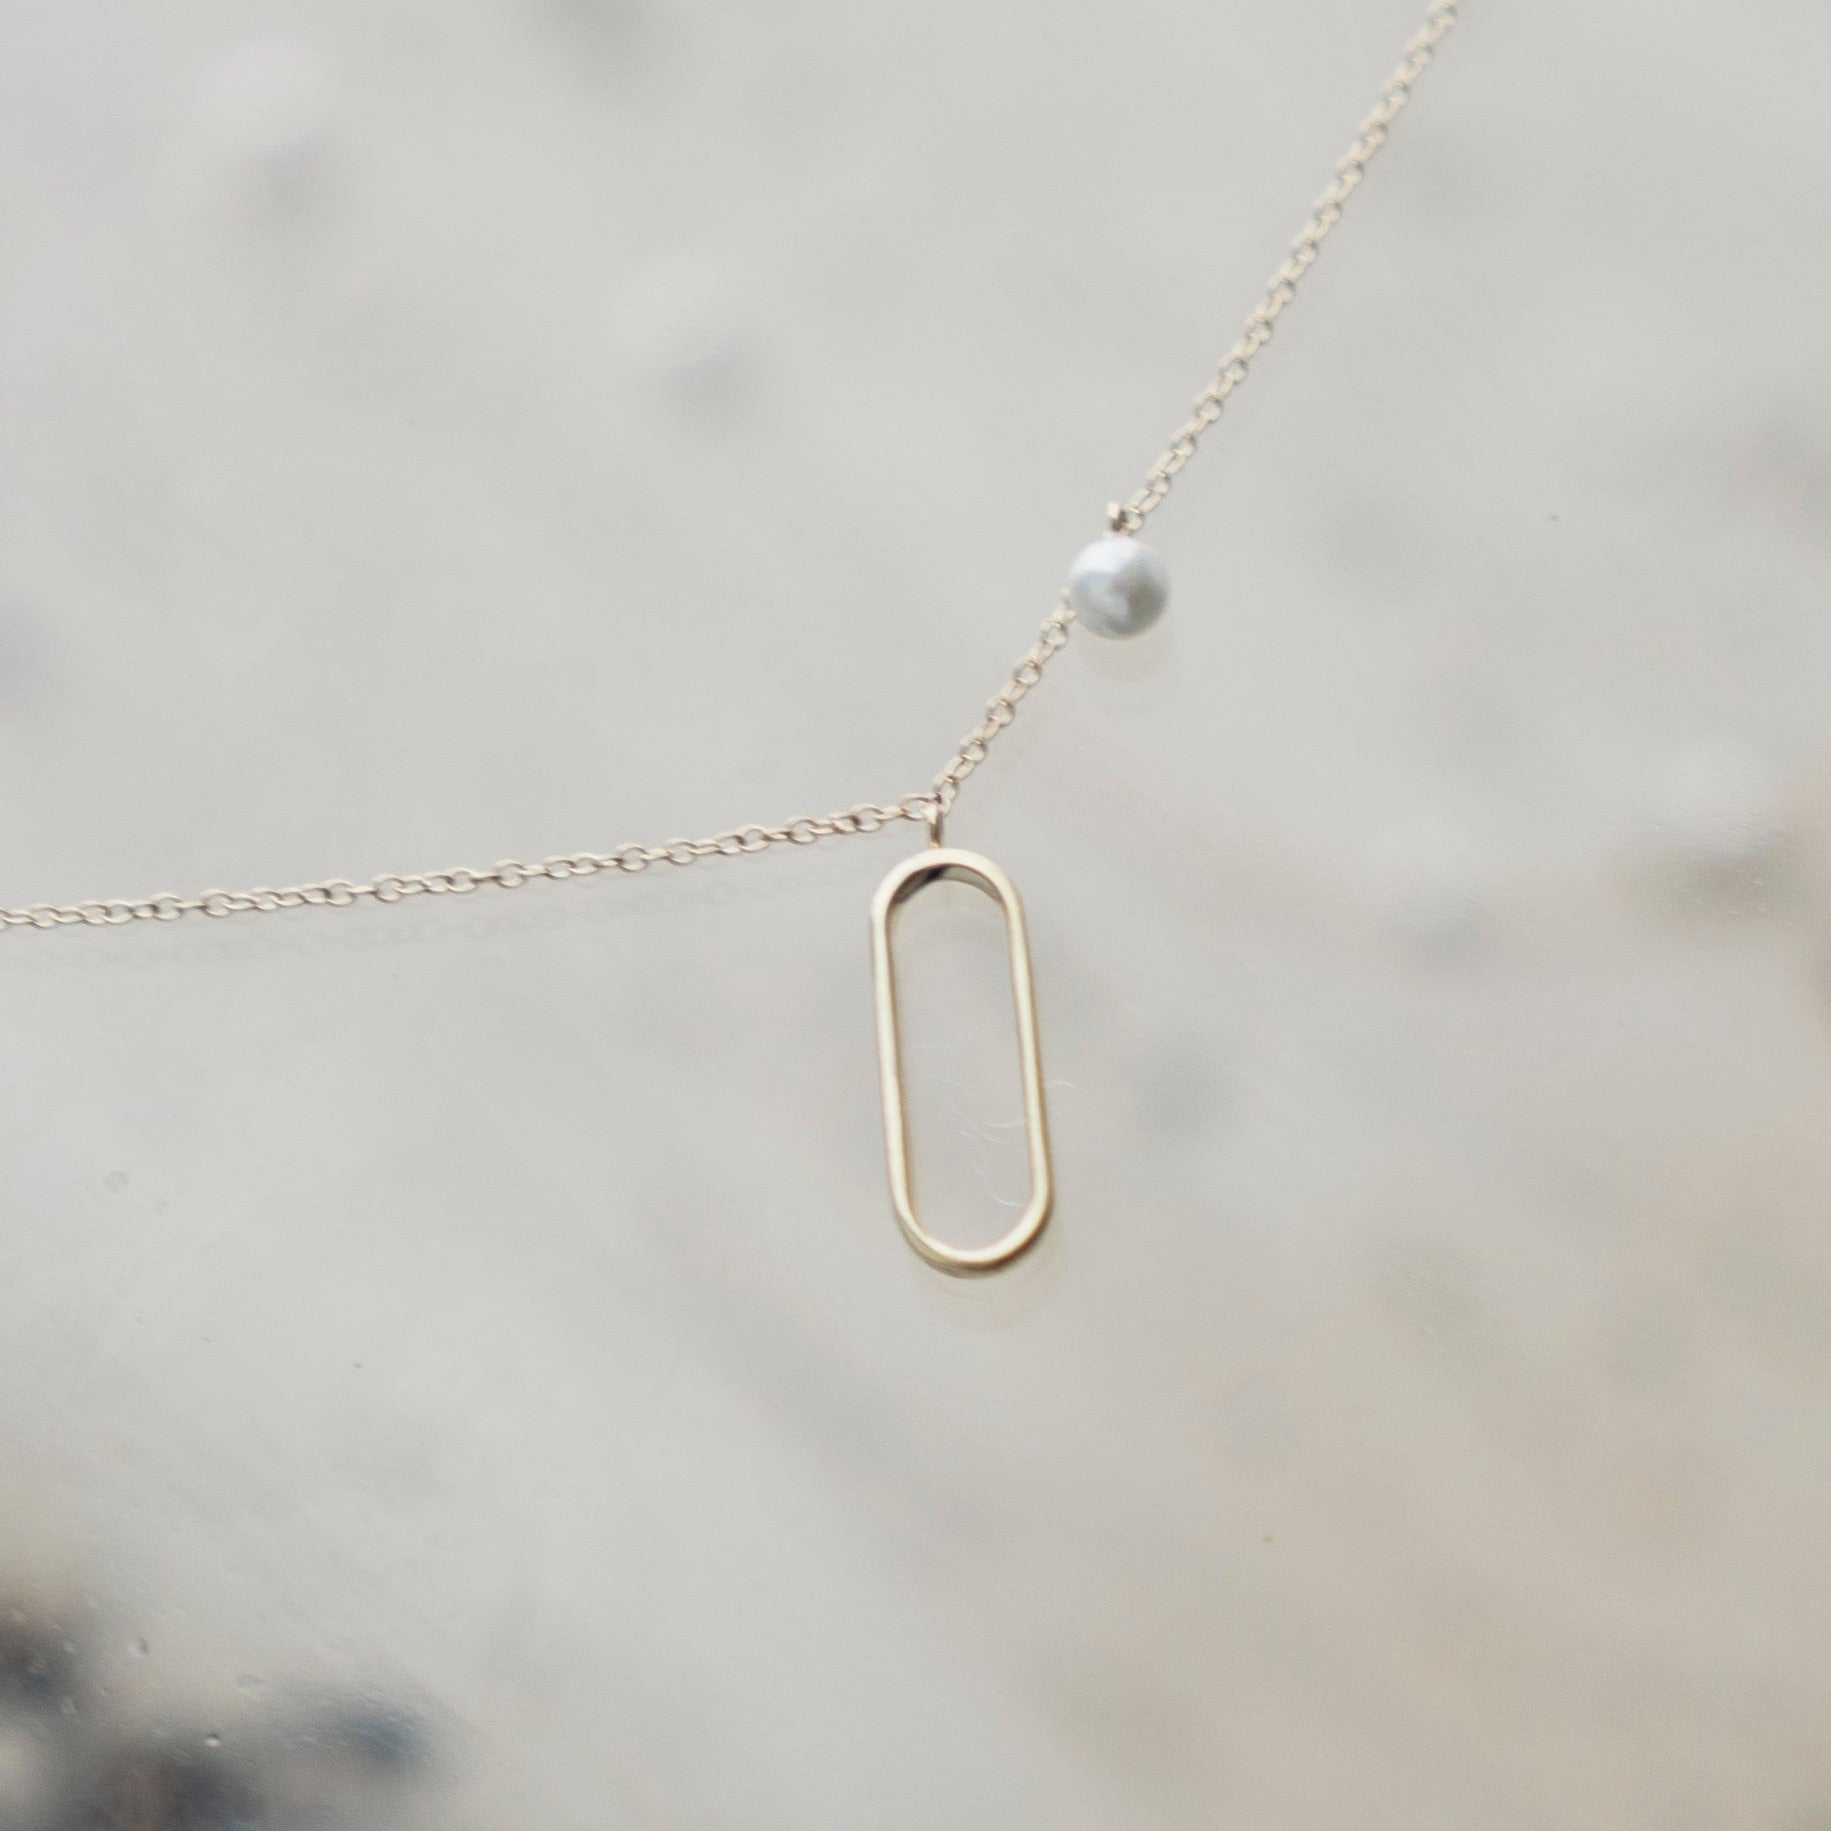 Rengi minimalist necklace in 14k yellow gold with pearlsmade in New York City by SHW fine Jewelry